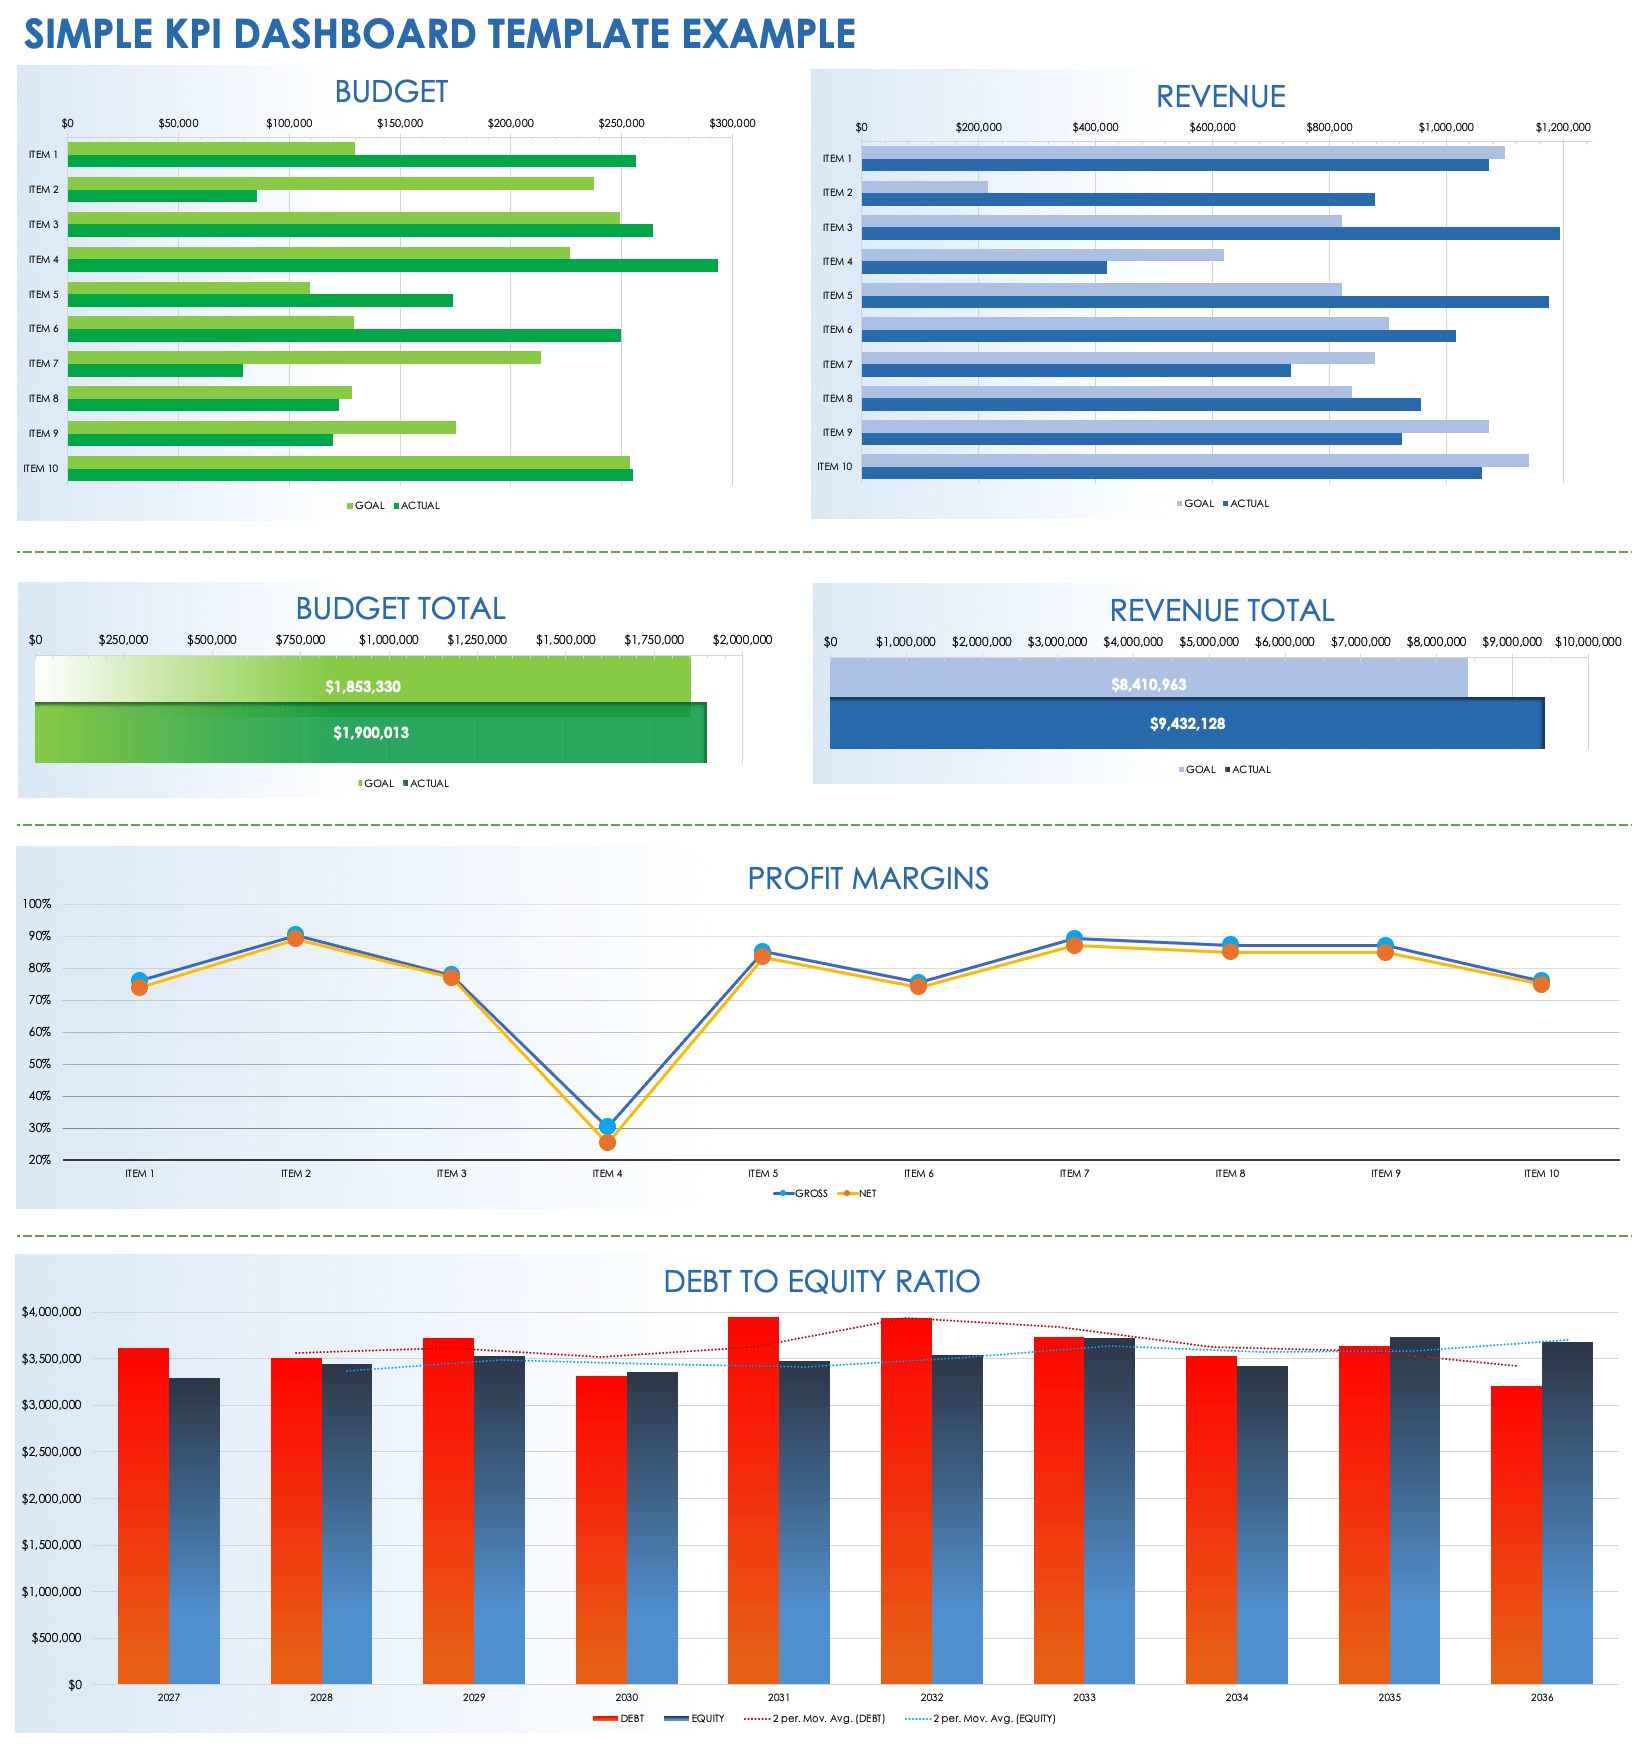 Simple KPI Dashboard Template Example